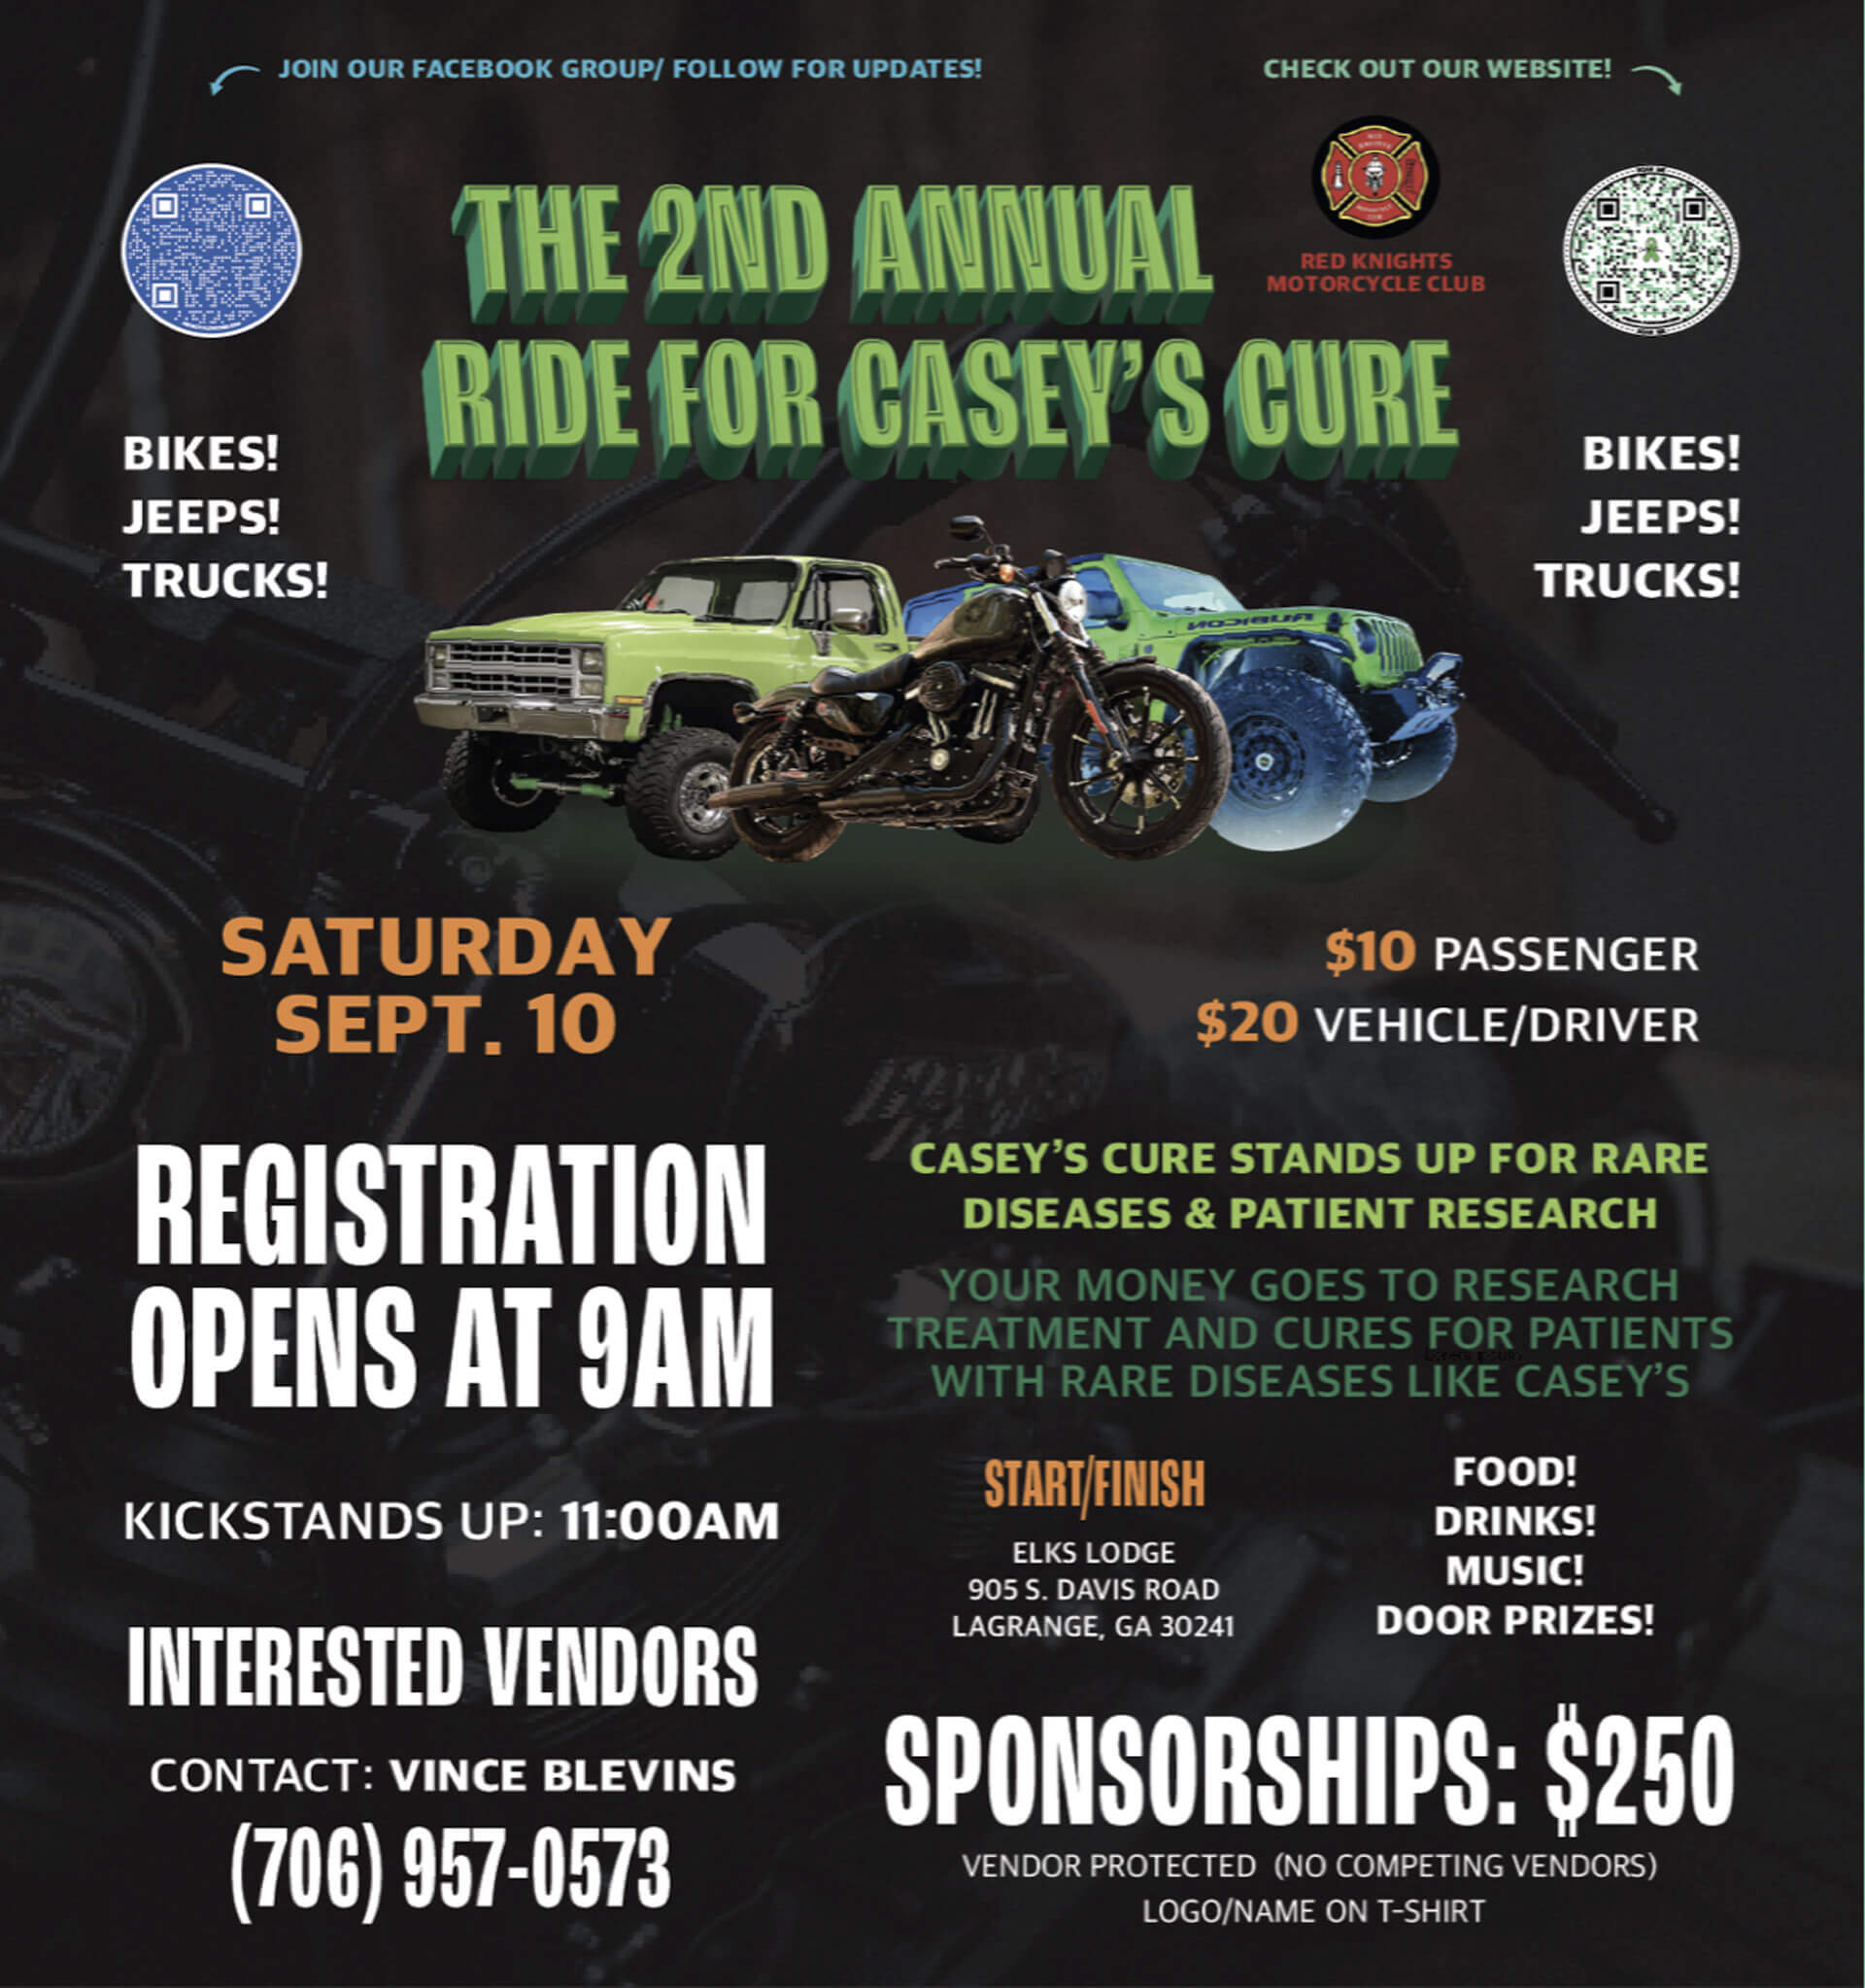 The 2nd Annual Ride for Casey’s Cure